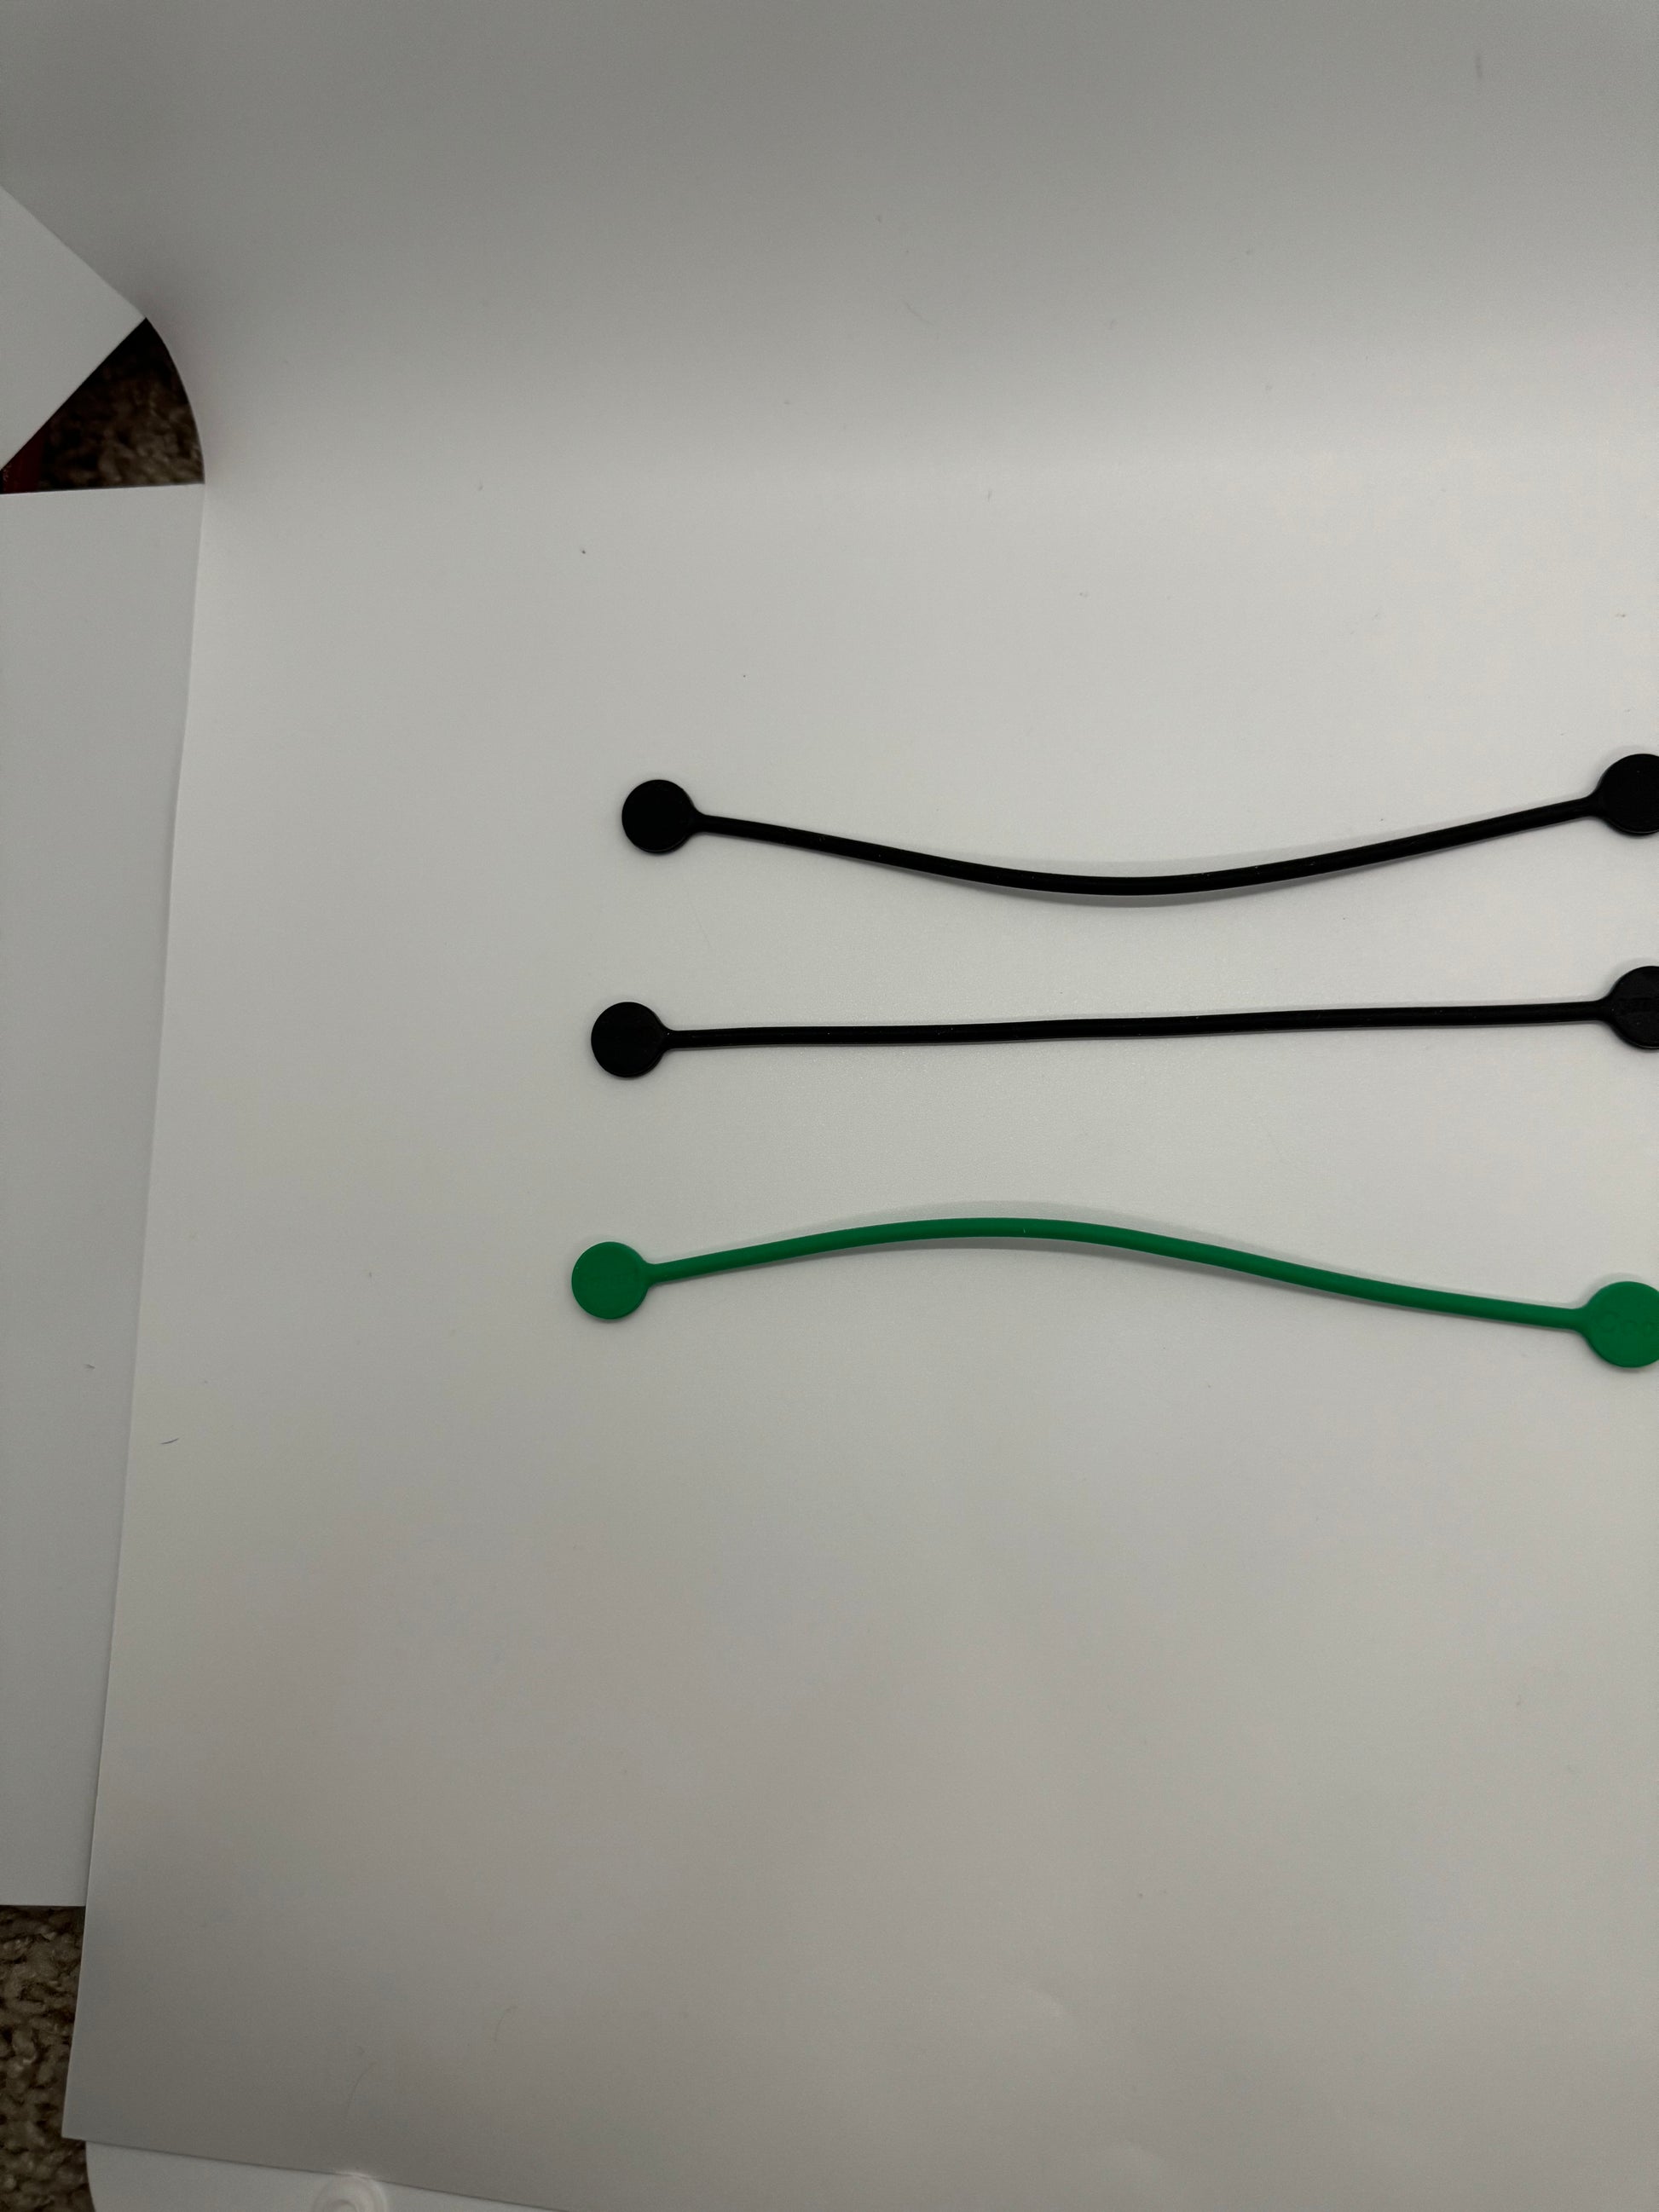 The picture shows three objects on a white background. There are two black bungee cords with balls at each end, placed one above the other. Below them, there is a similar object but in green color. The green one is slightly curved. The background is plain white and there is a small portion of a carpet visible in the bottom left corner.